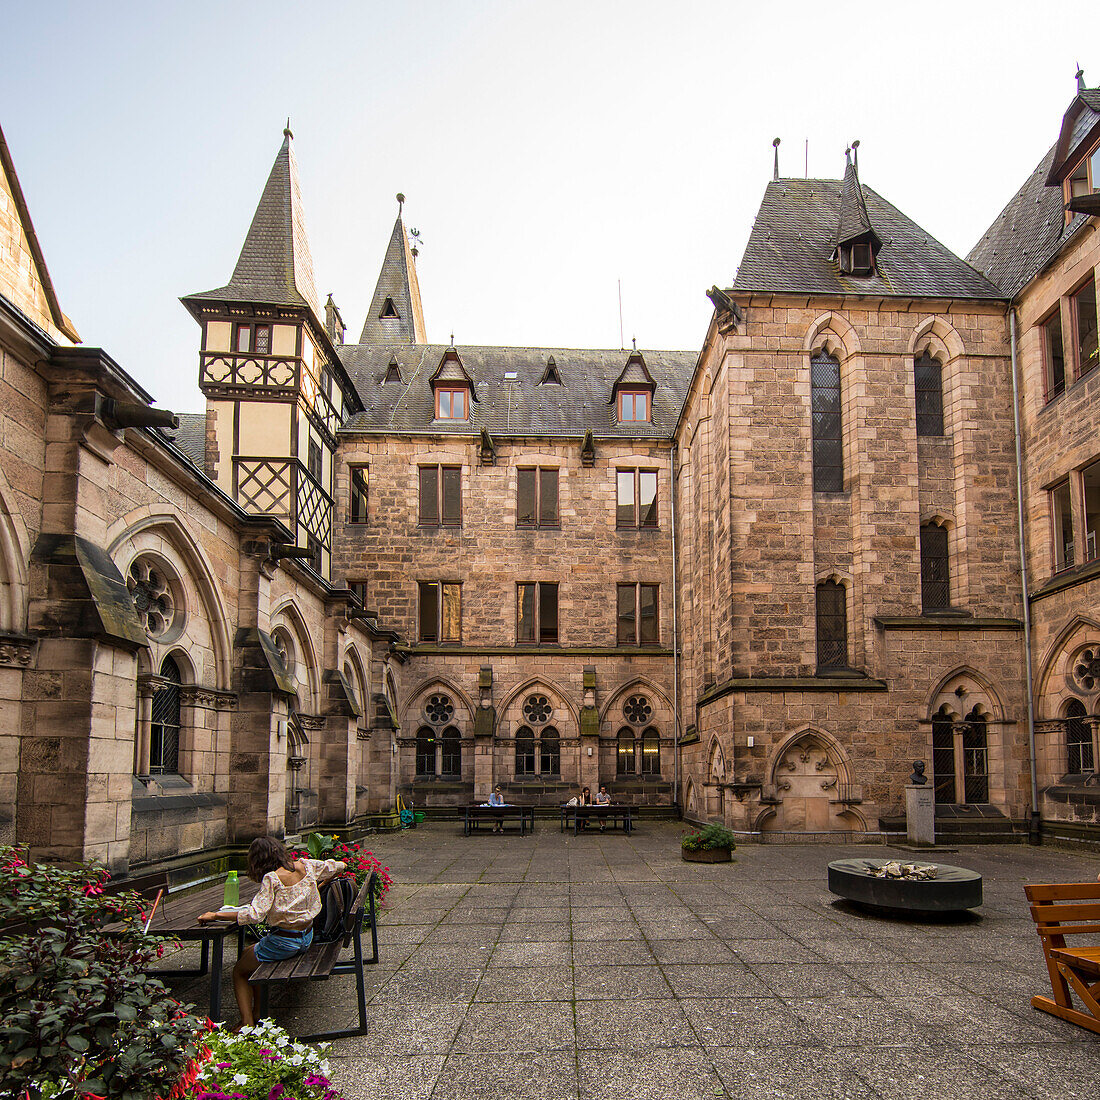 Patio of the Old University built on the ruins of a Dominican monastery., Marburg, Hesse, Germany, Europe